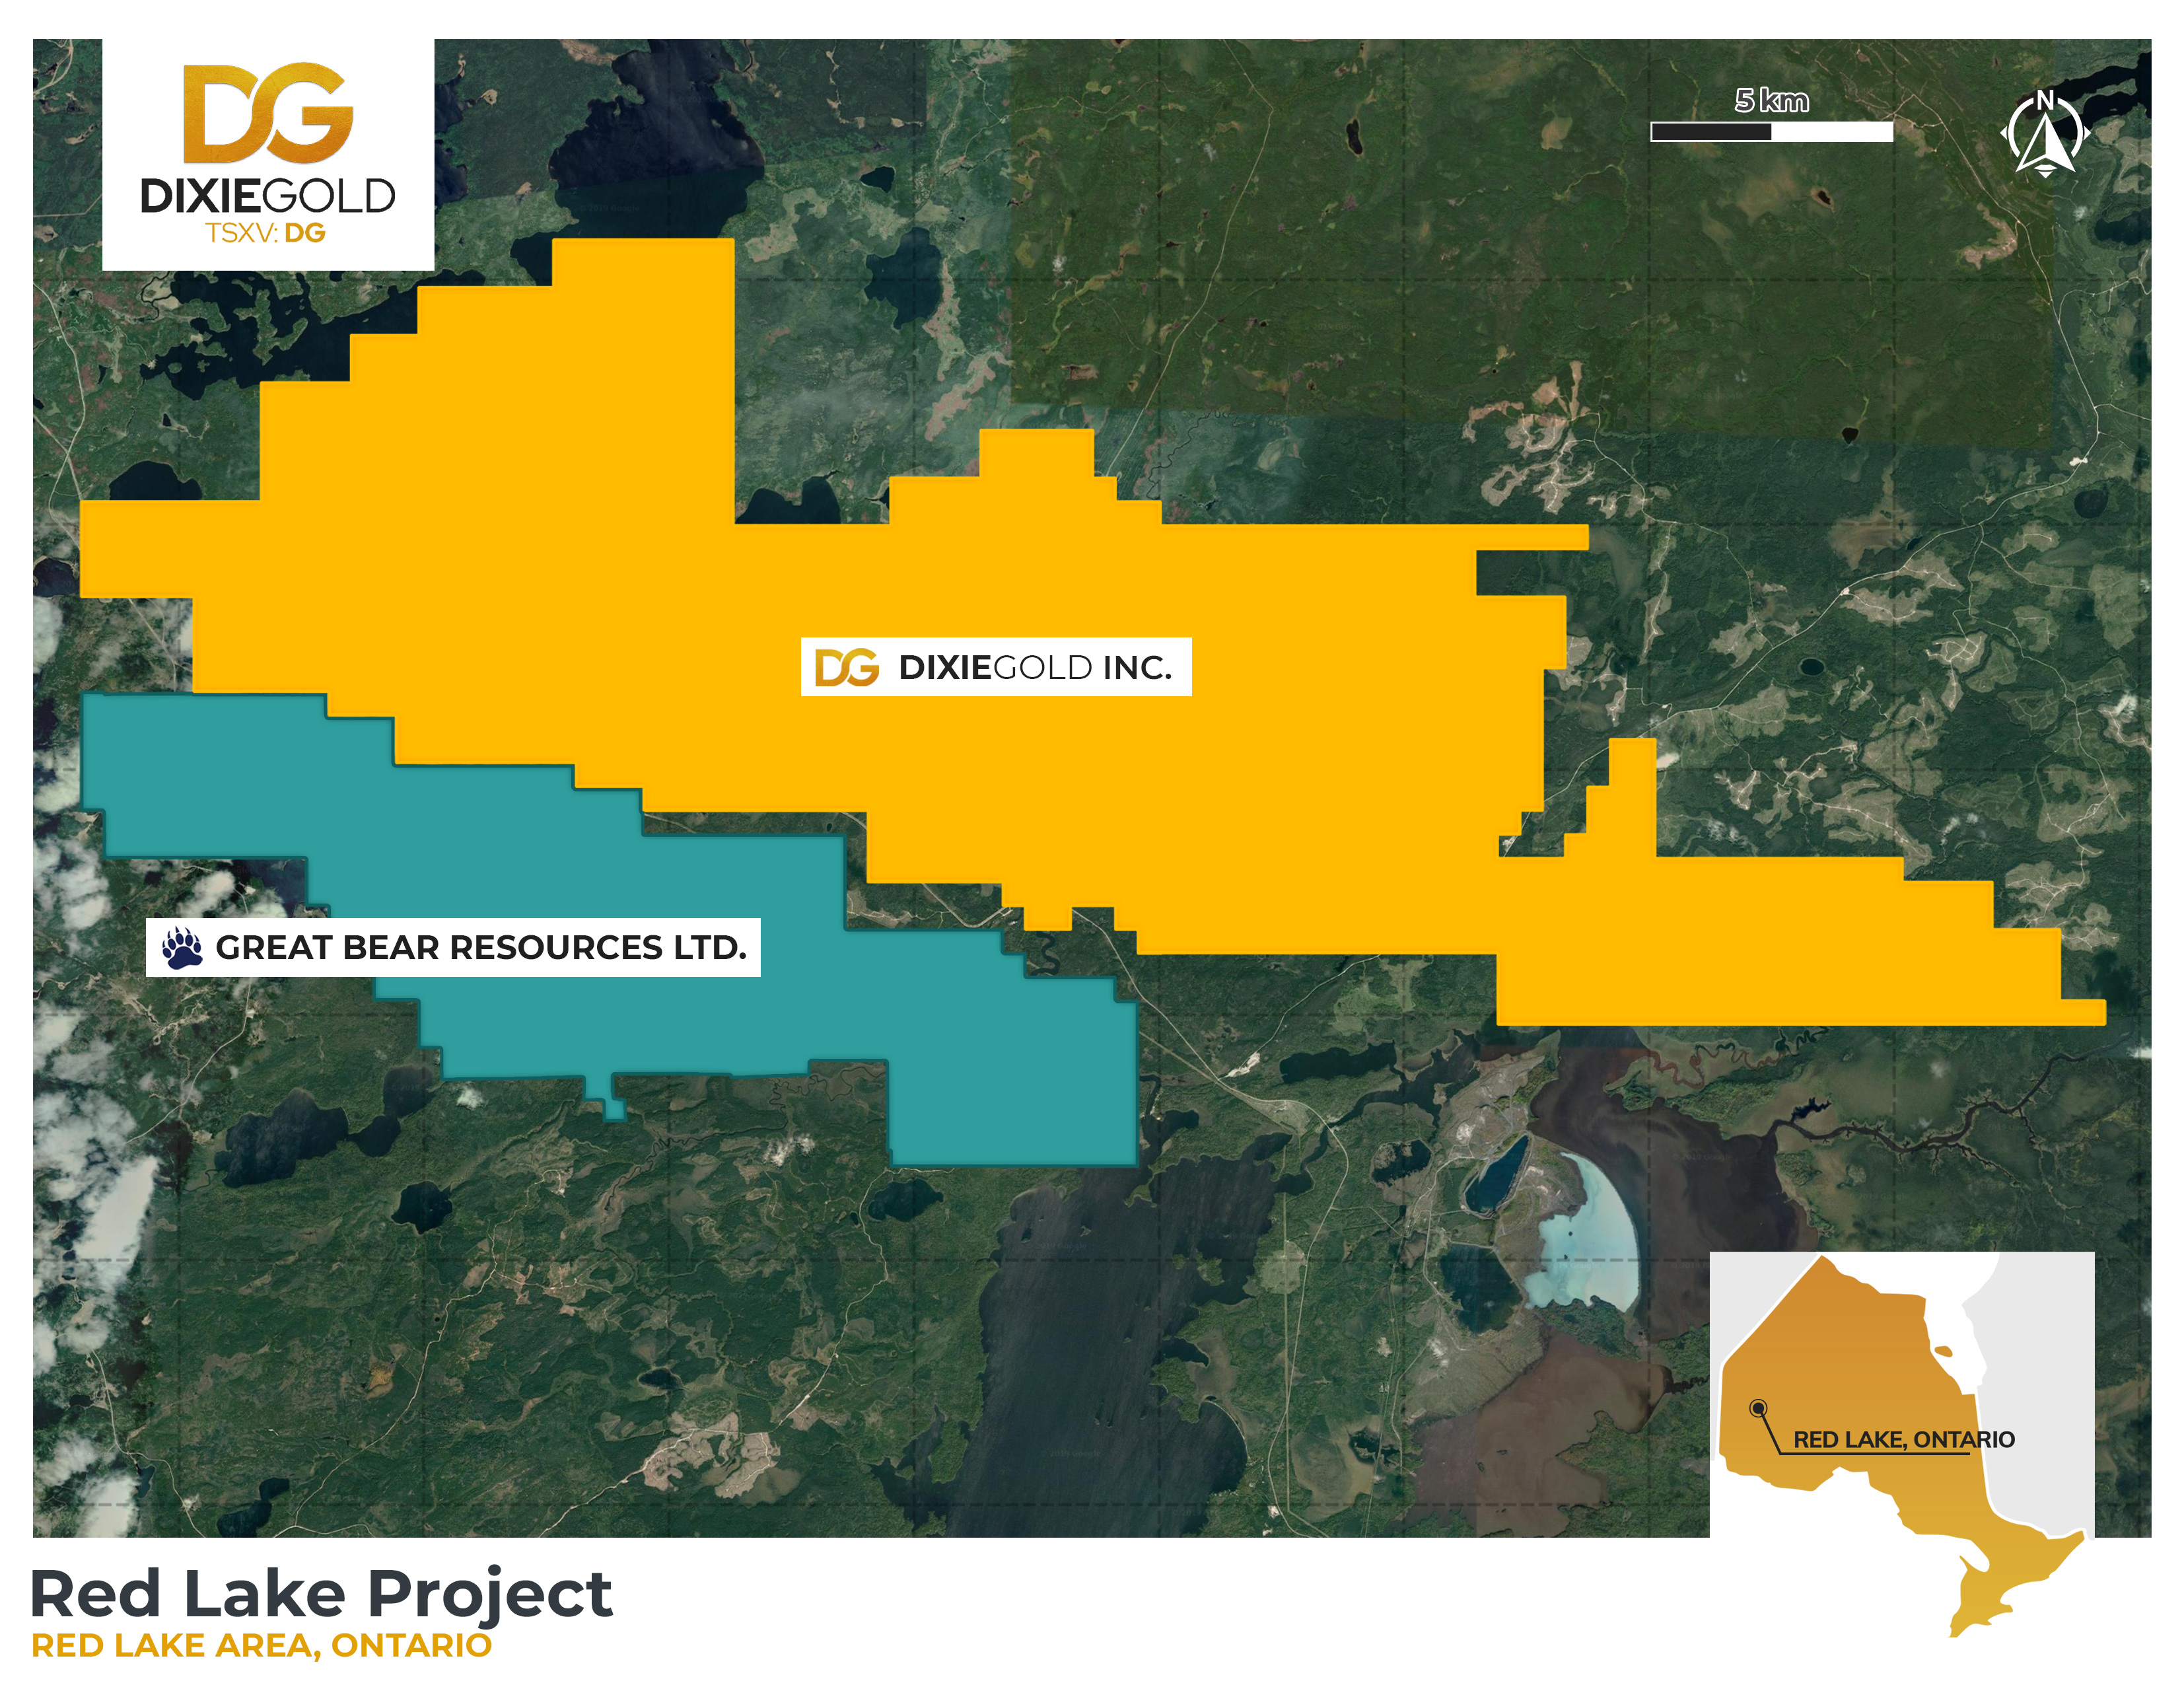 Figure 1: Dixie Gold Inc. - Claim Map of the Red Lake Gold Project